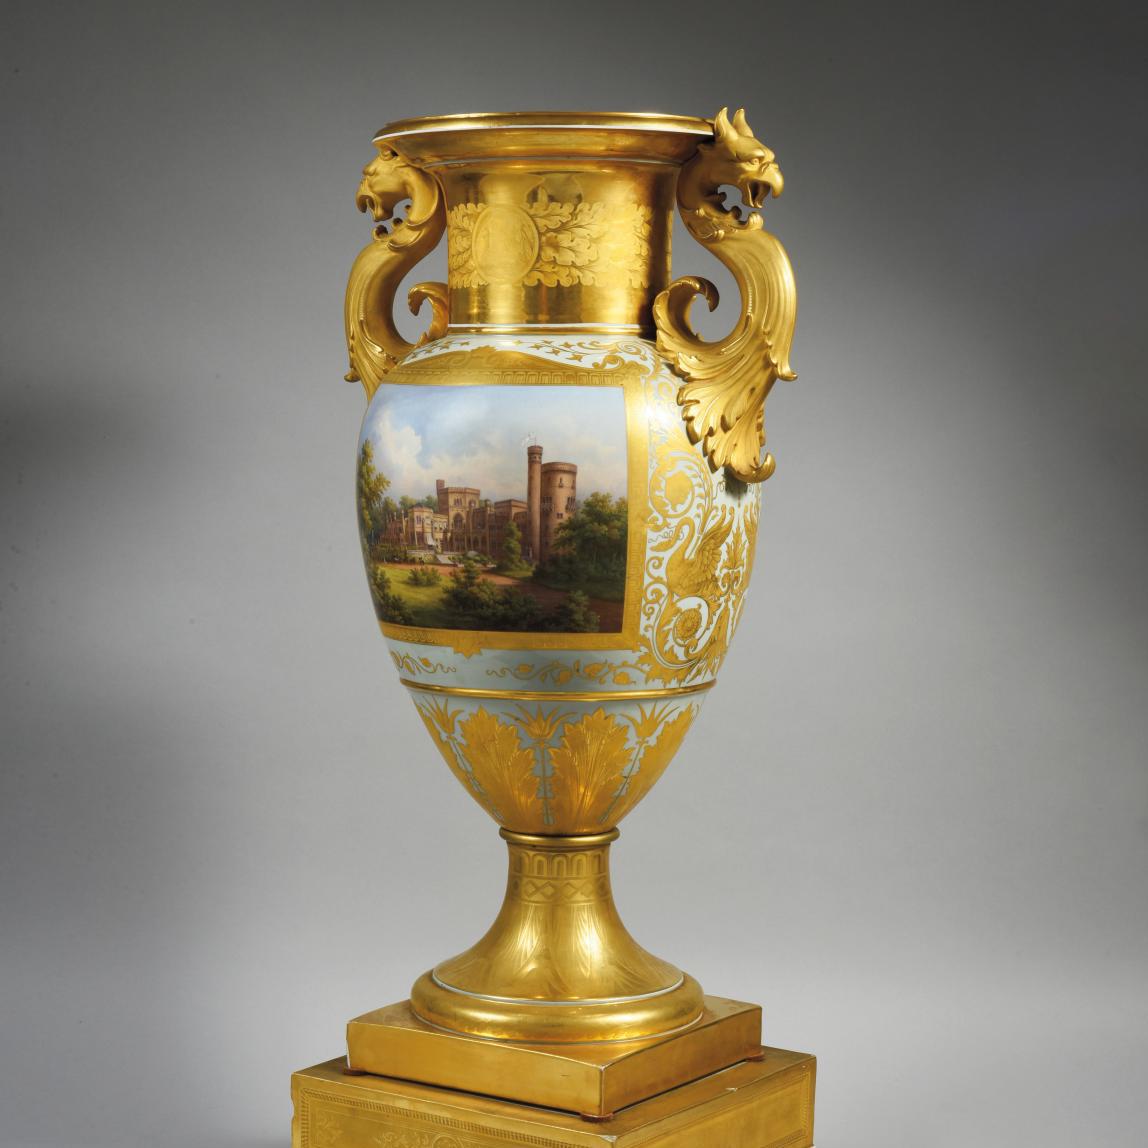 Pre-sale - A Porcelain Palace from the Royal Porcelain Manufactory Berlin